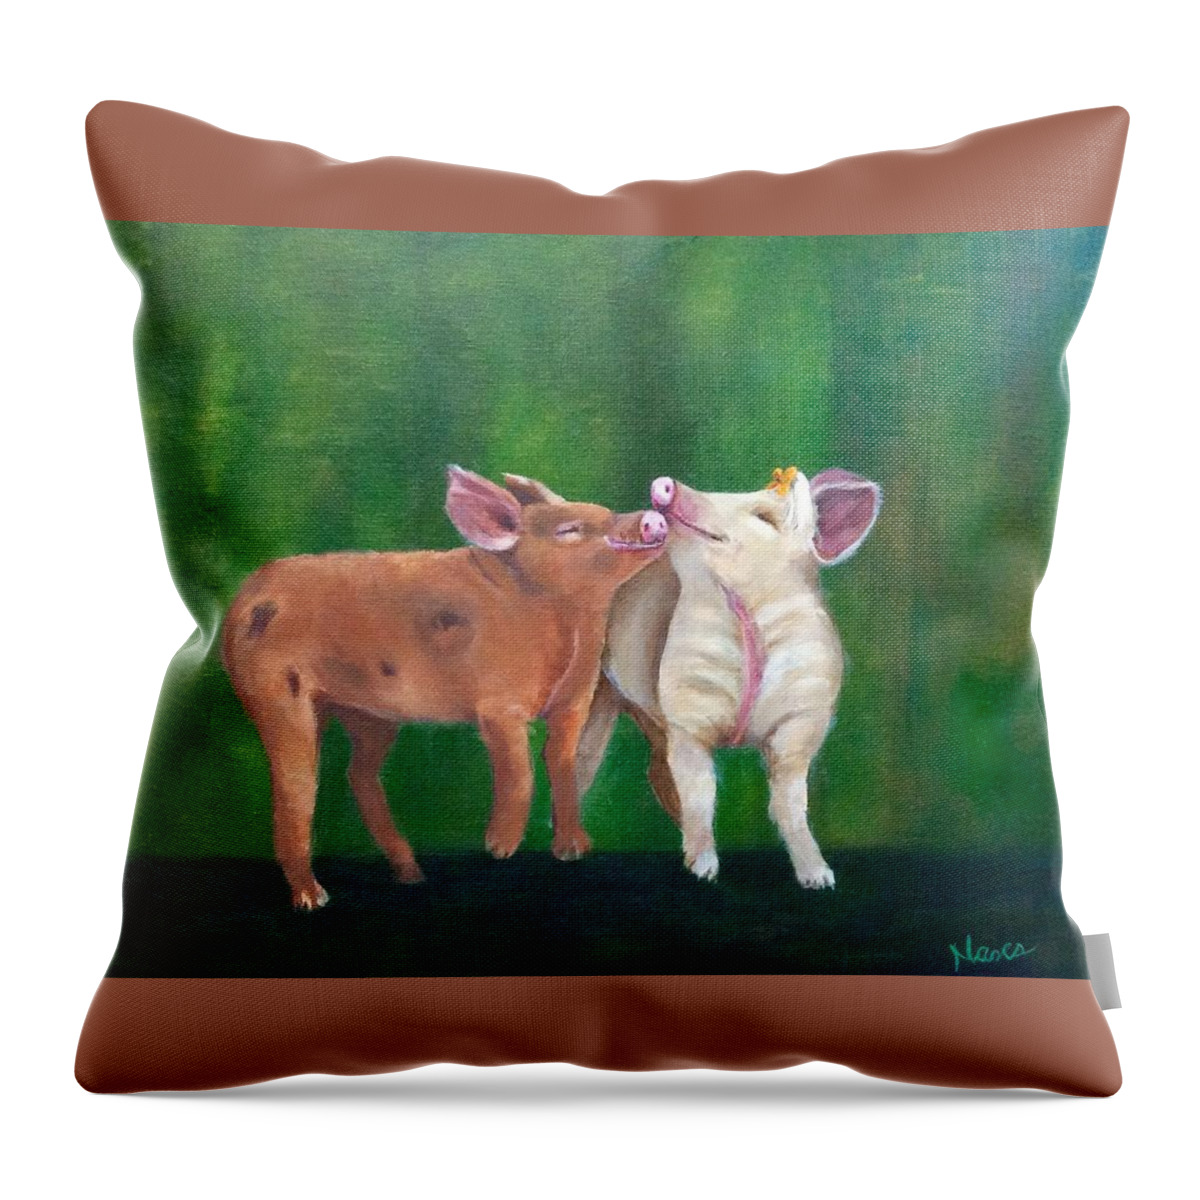 Pigs Throw Pillow featuring the painting Swine Snuggles by Deborah Naves